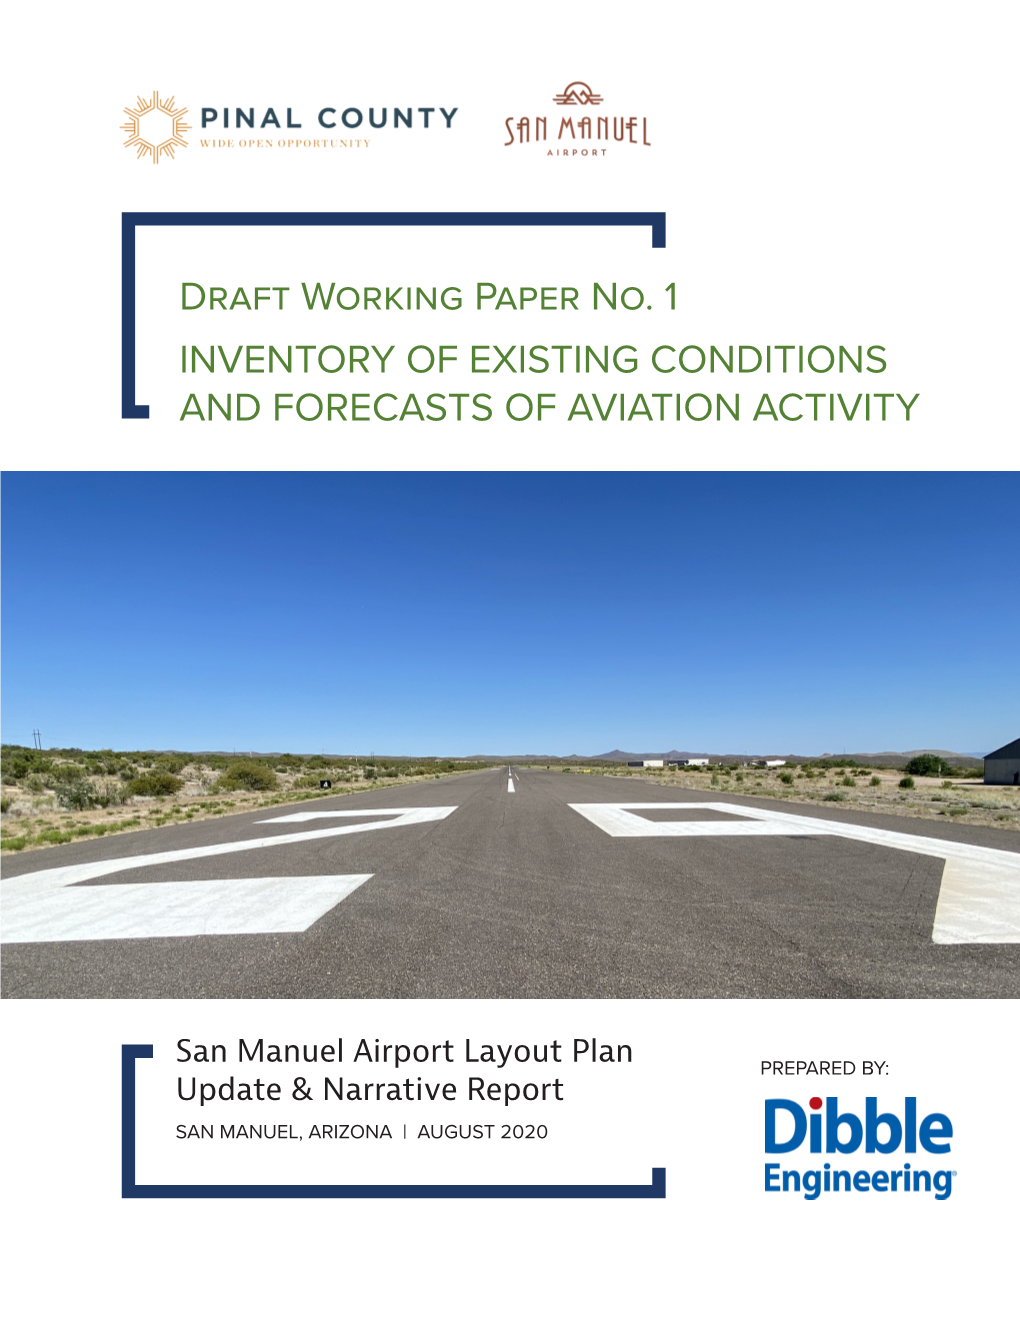 San Manuel Airport Layout Plan Update and Narrative Report